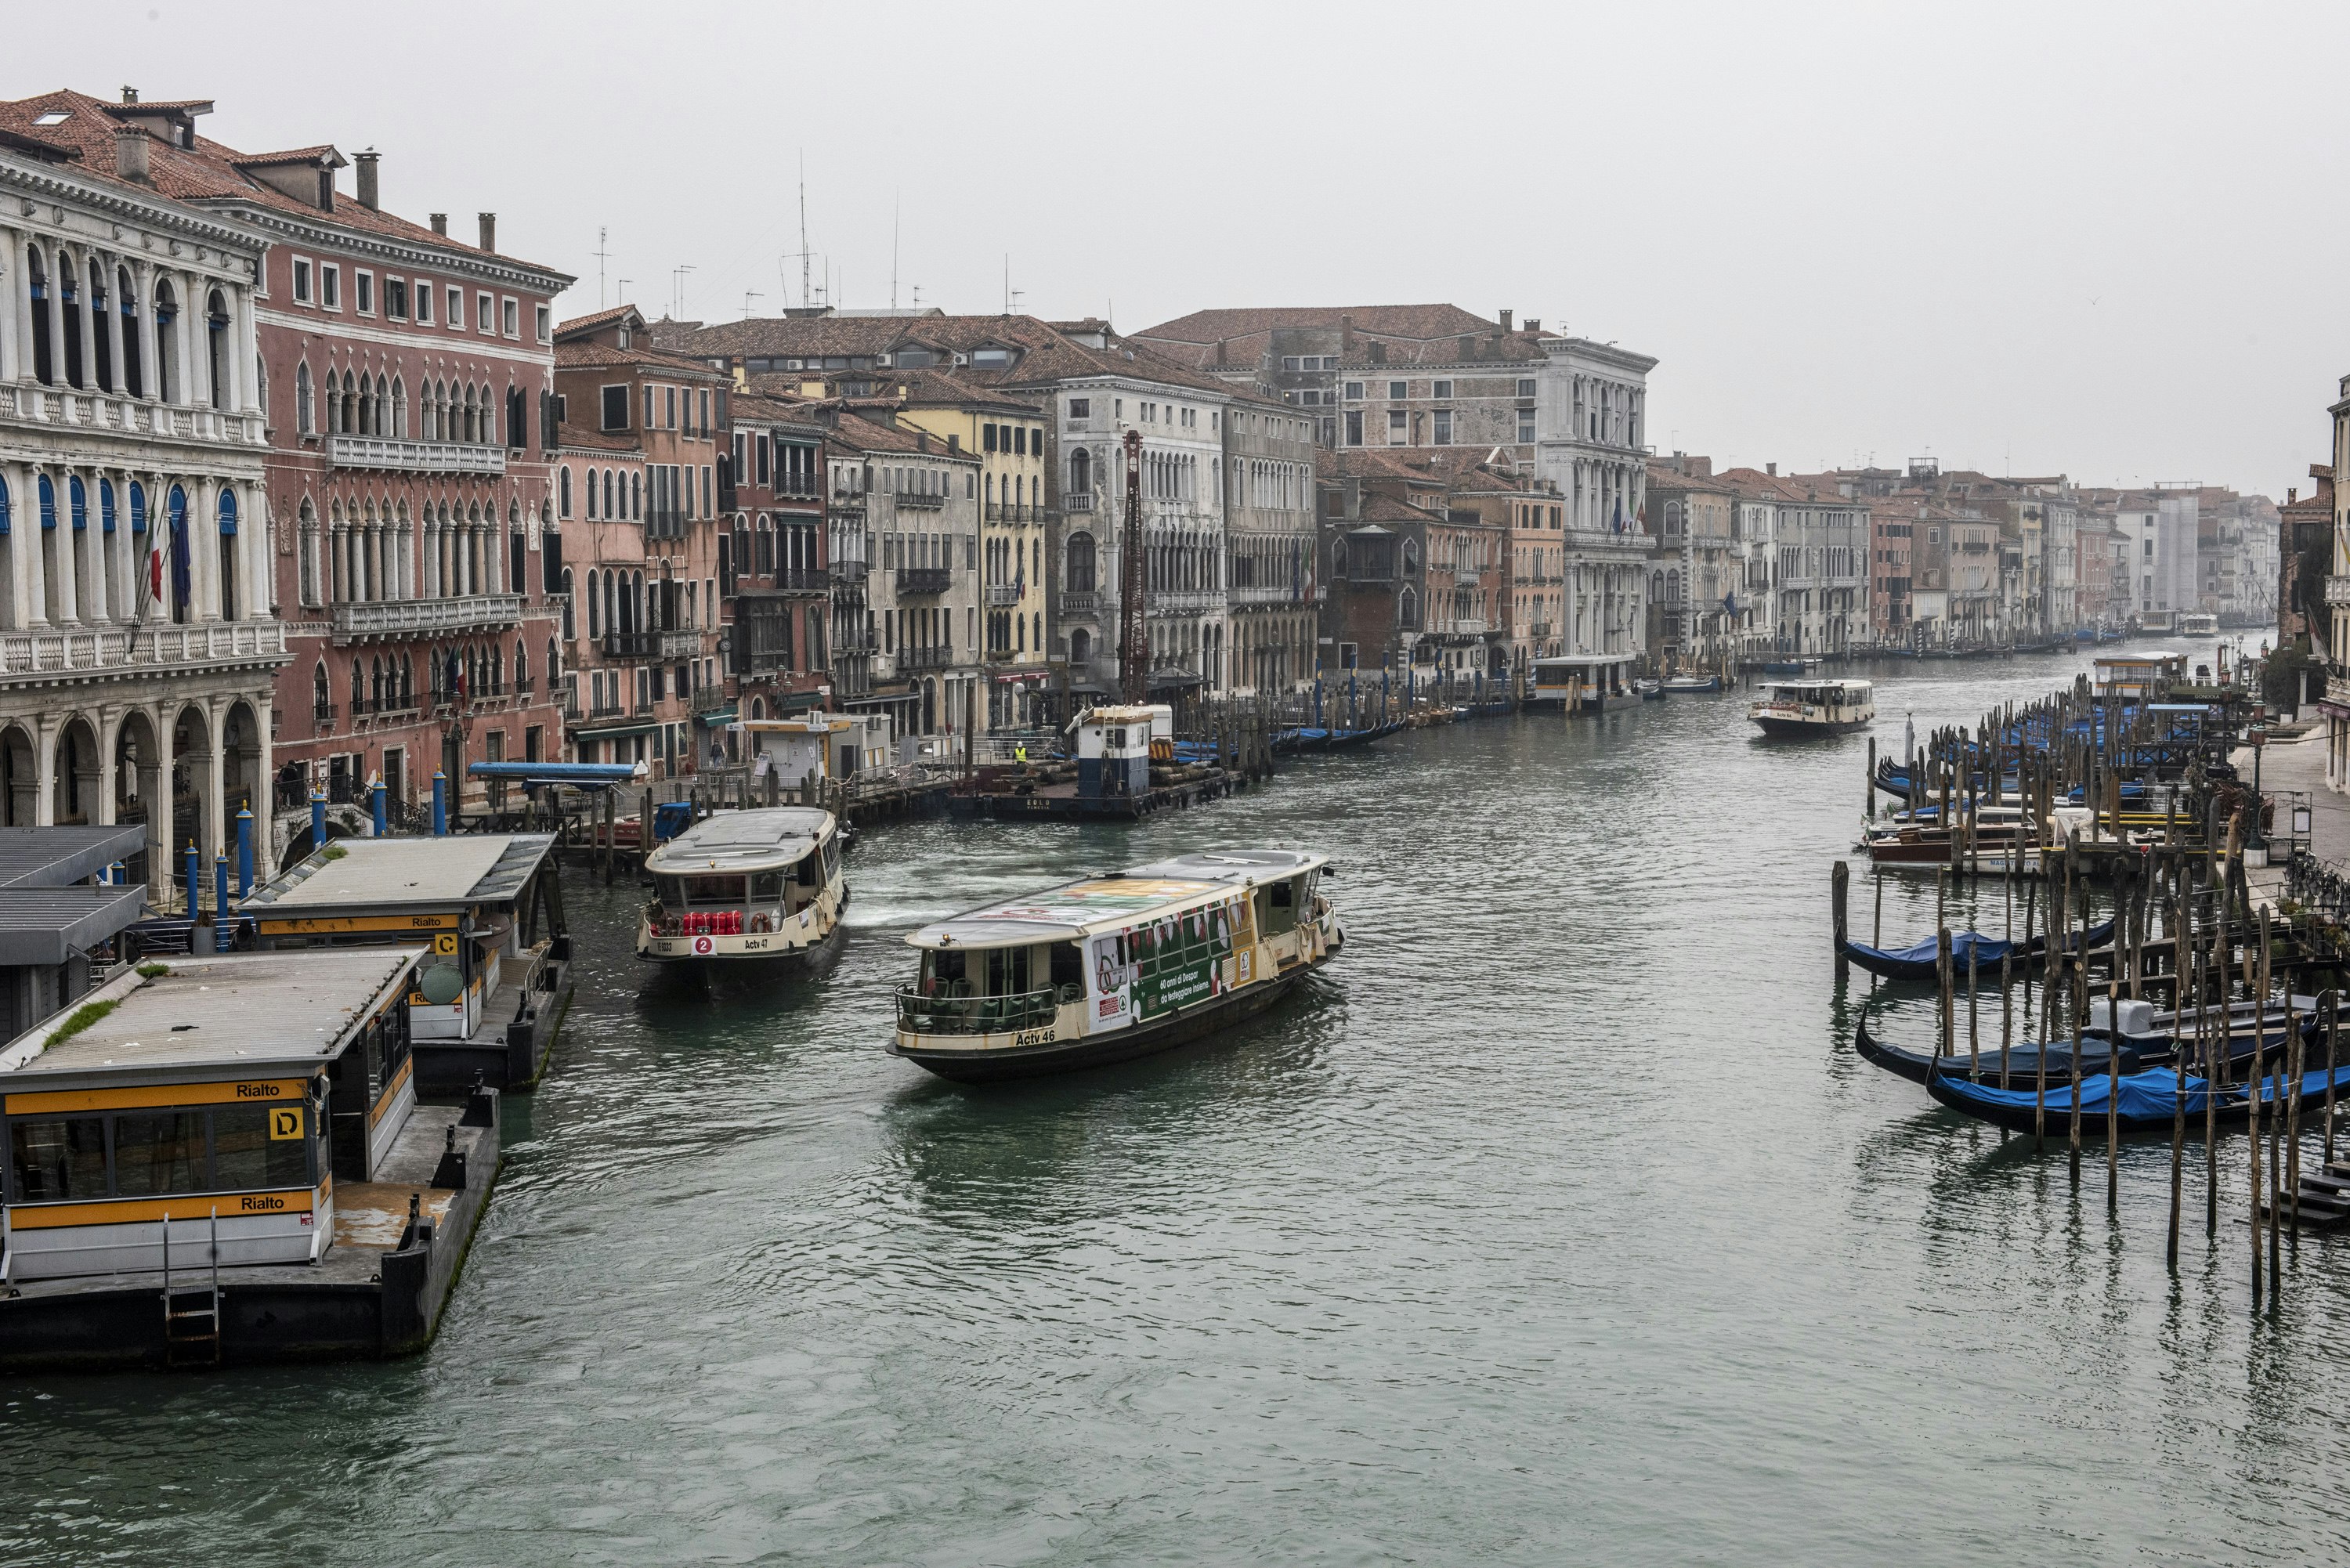 Venice's Grand Canal during Italy's coronavirus lockdown: there are boats on the waterway but not a tourist to be seen.